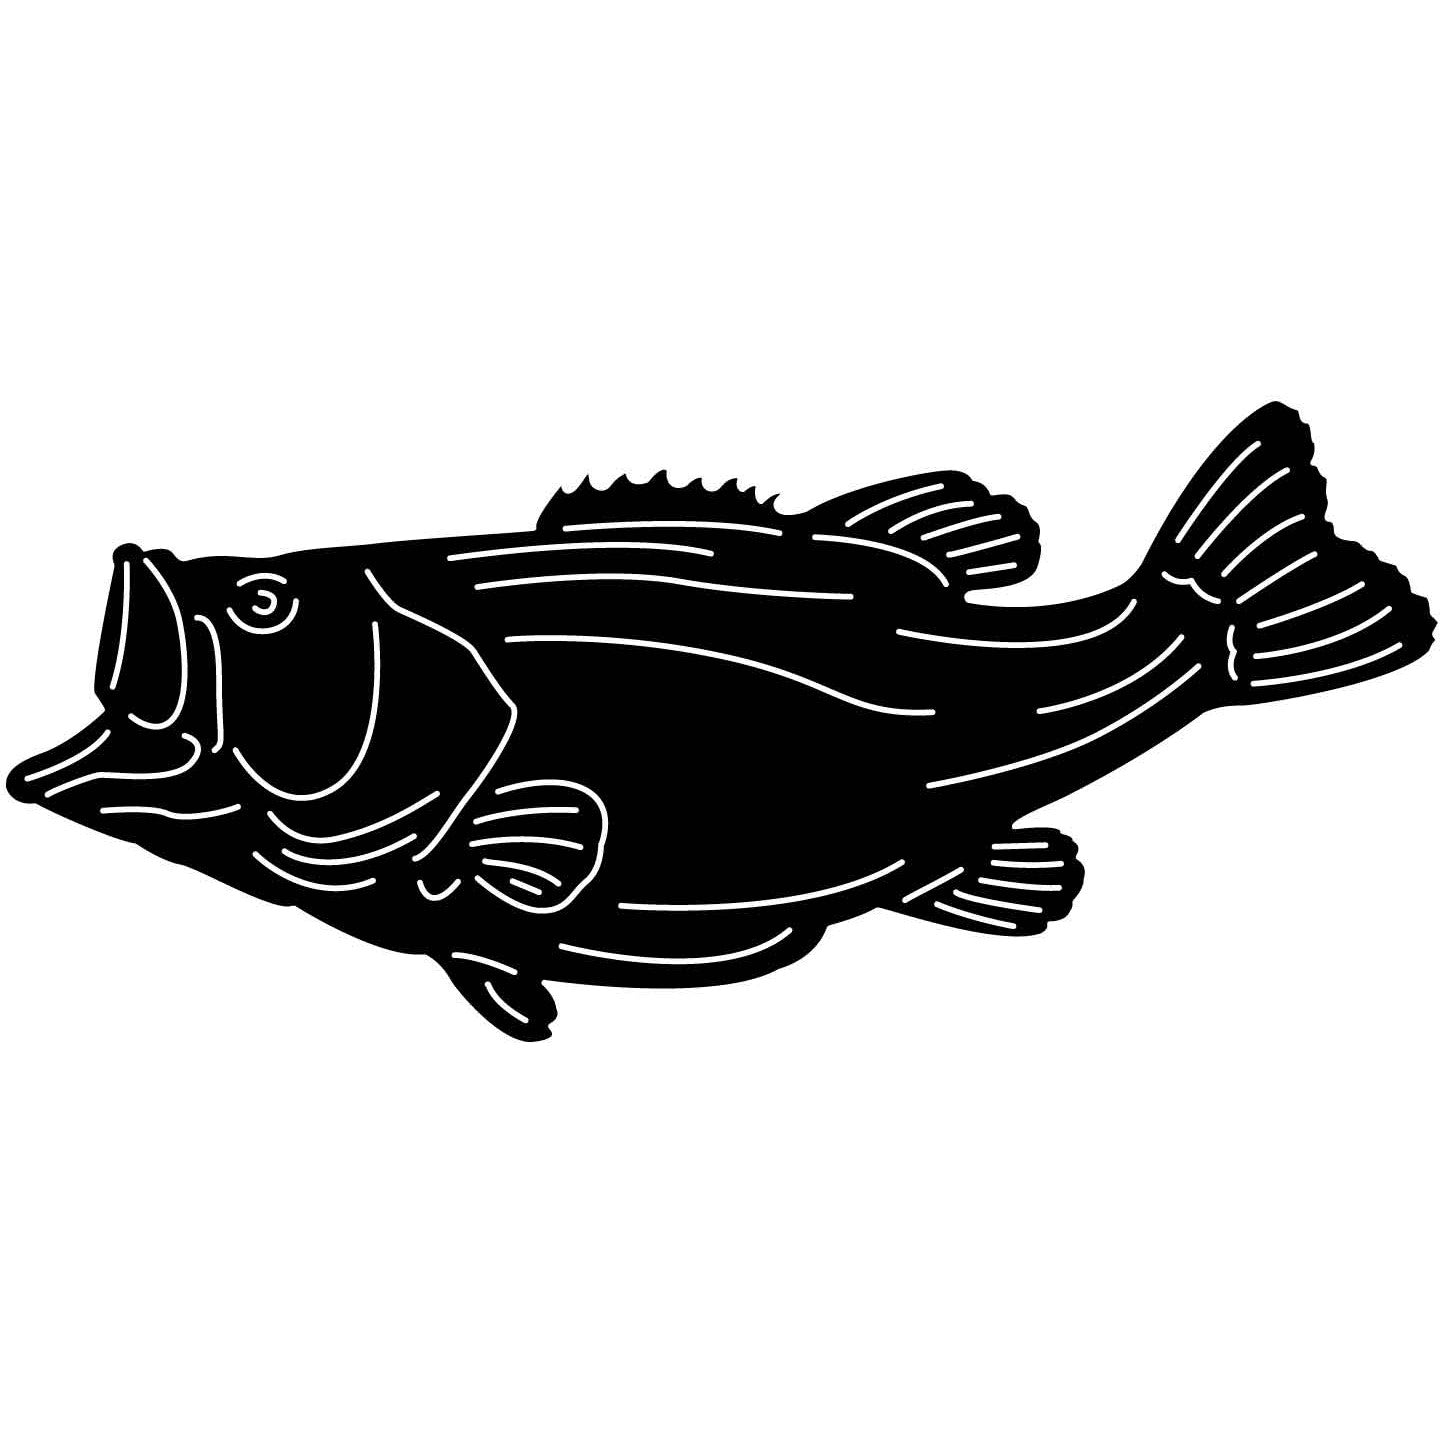 Underwater Fish-Bass 02 DXF File Cut Ready for CNC